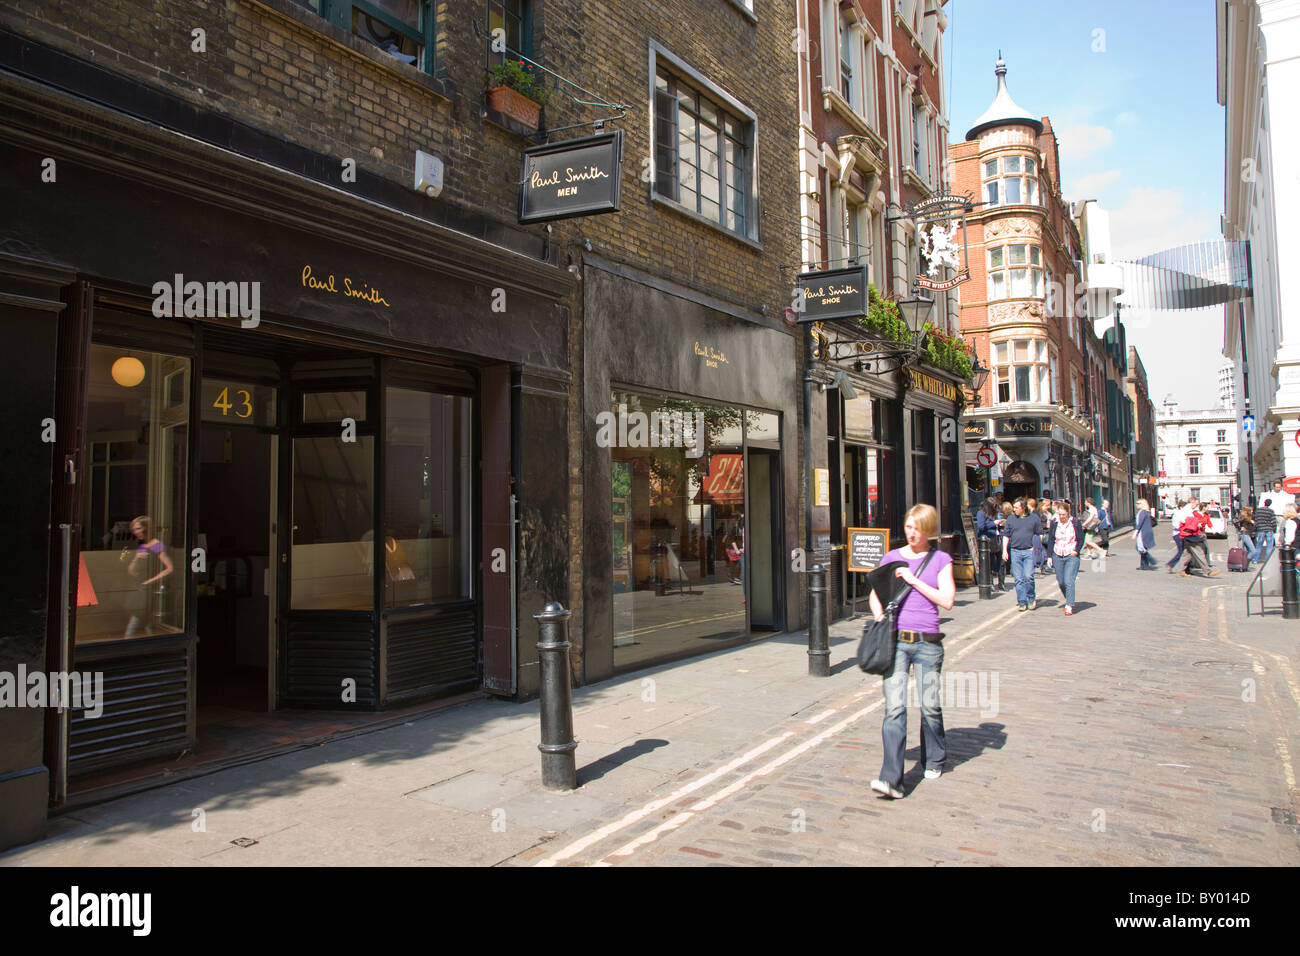 Paul Smith shop on Floral Street in Covent Garden Stock Photo - Alamy